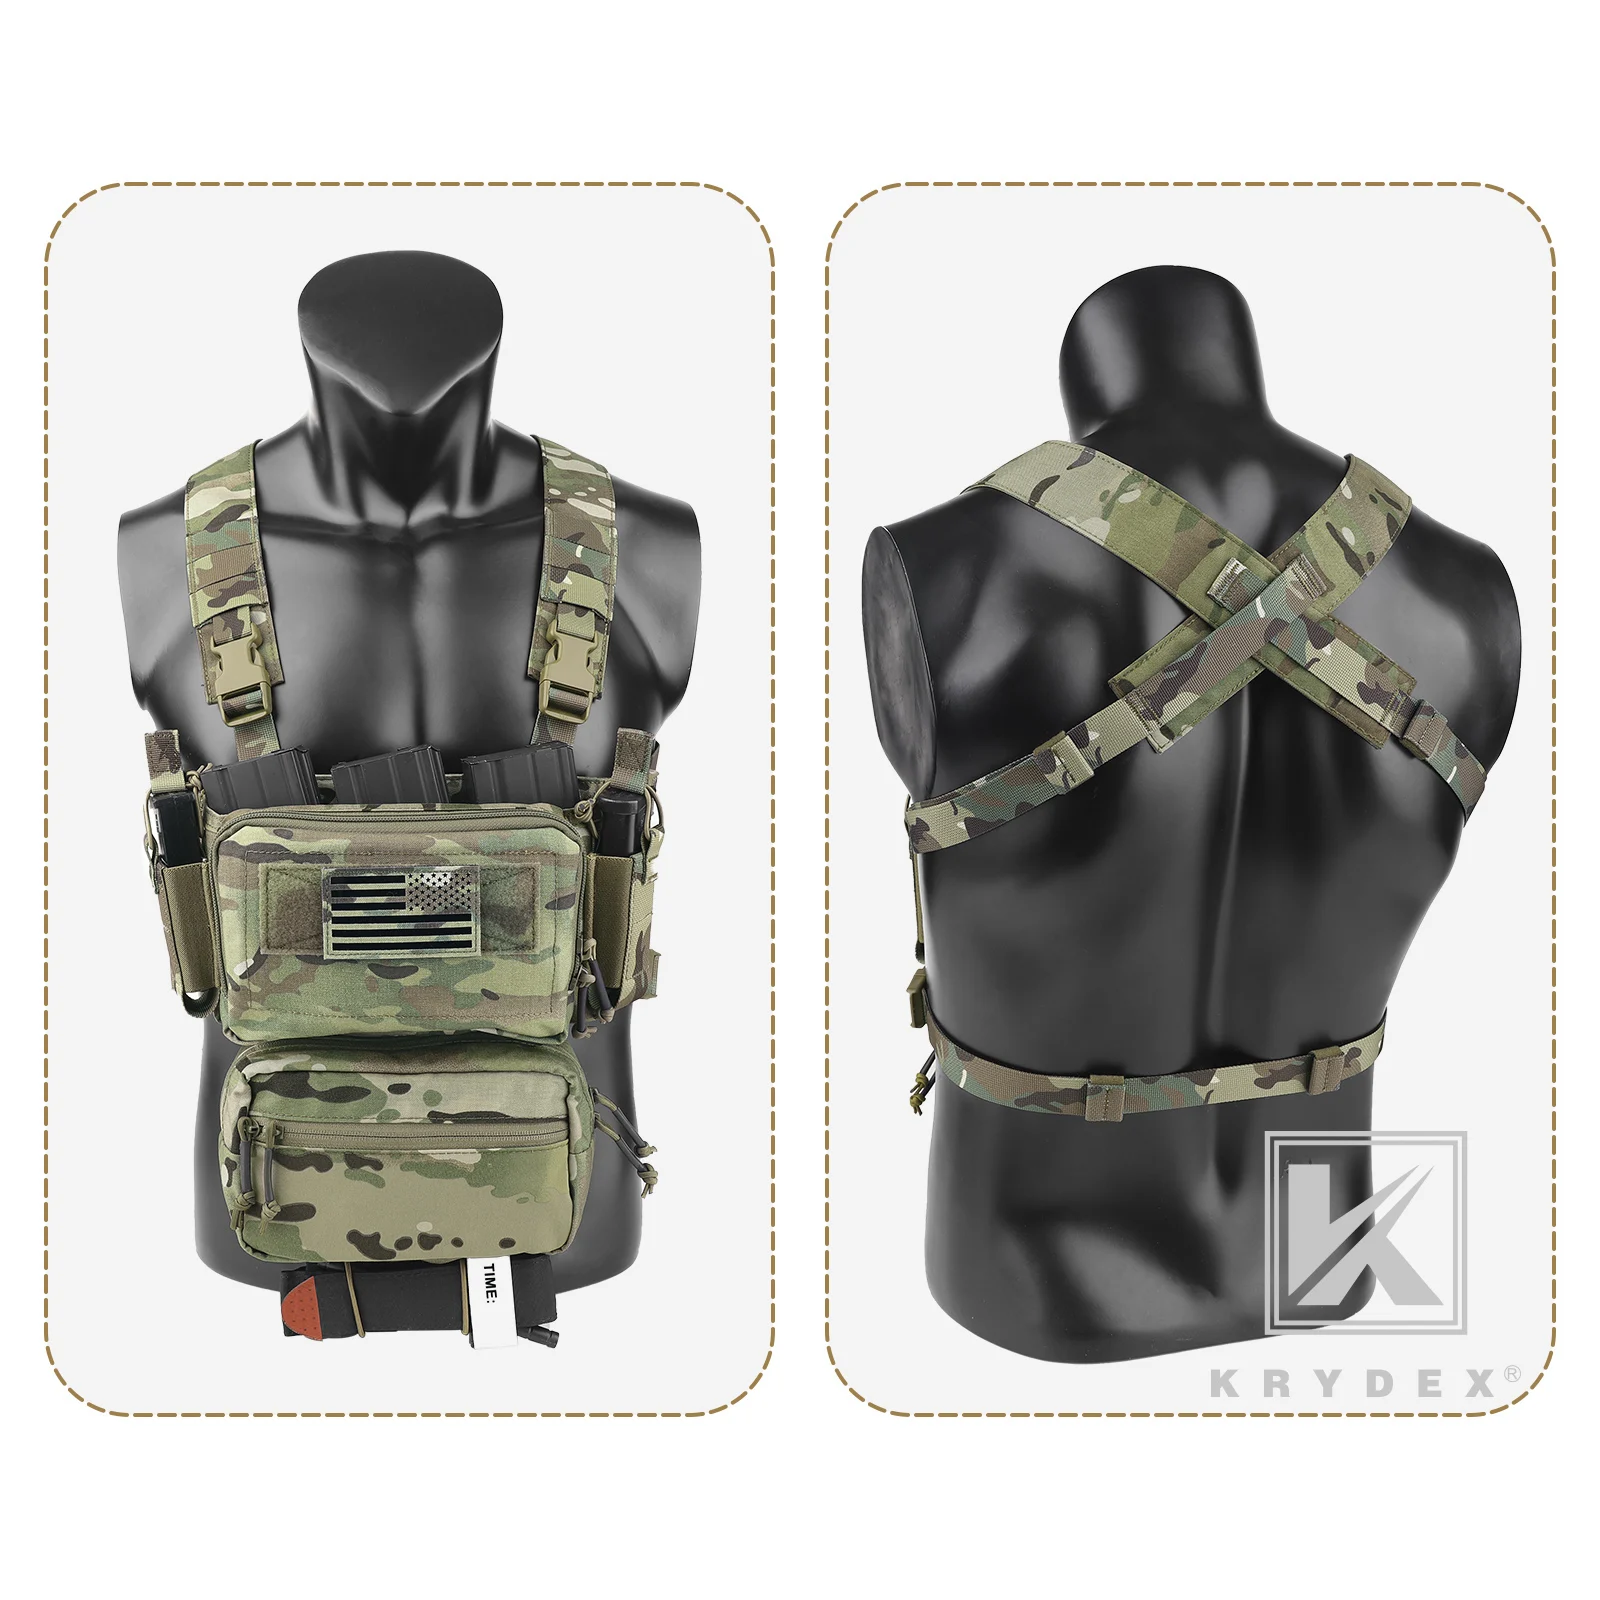 KRYDEX Hunting Molle Tactical Military D3CRM Tactical Chest Rig Outdoor Airsoft accessories EDC Caza Lightweight colete Military images - 6